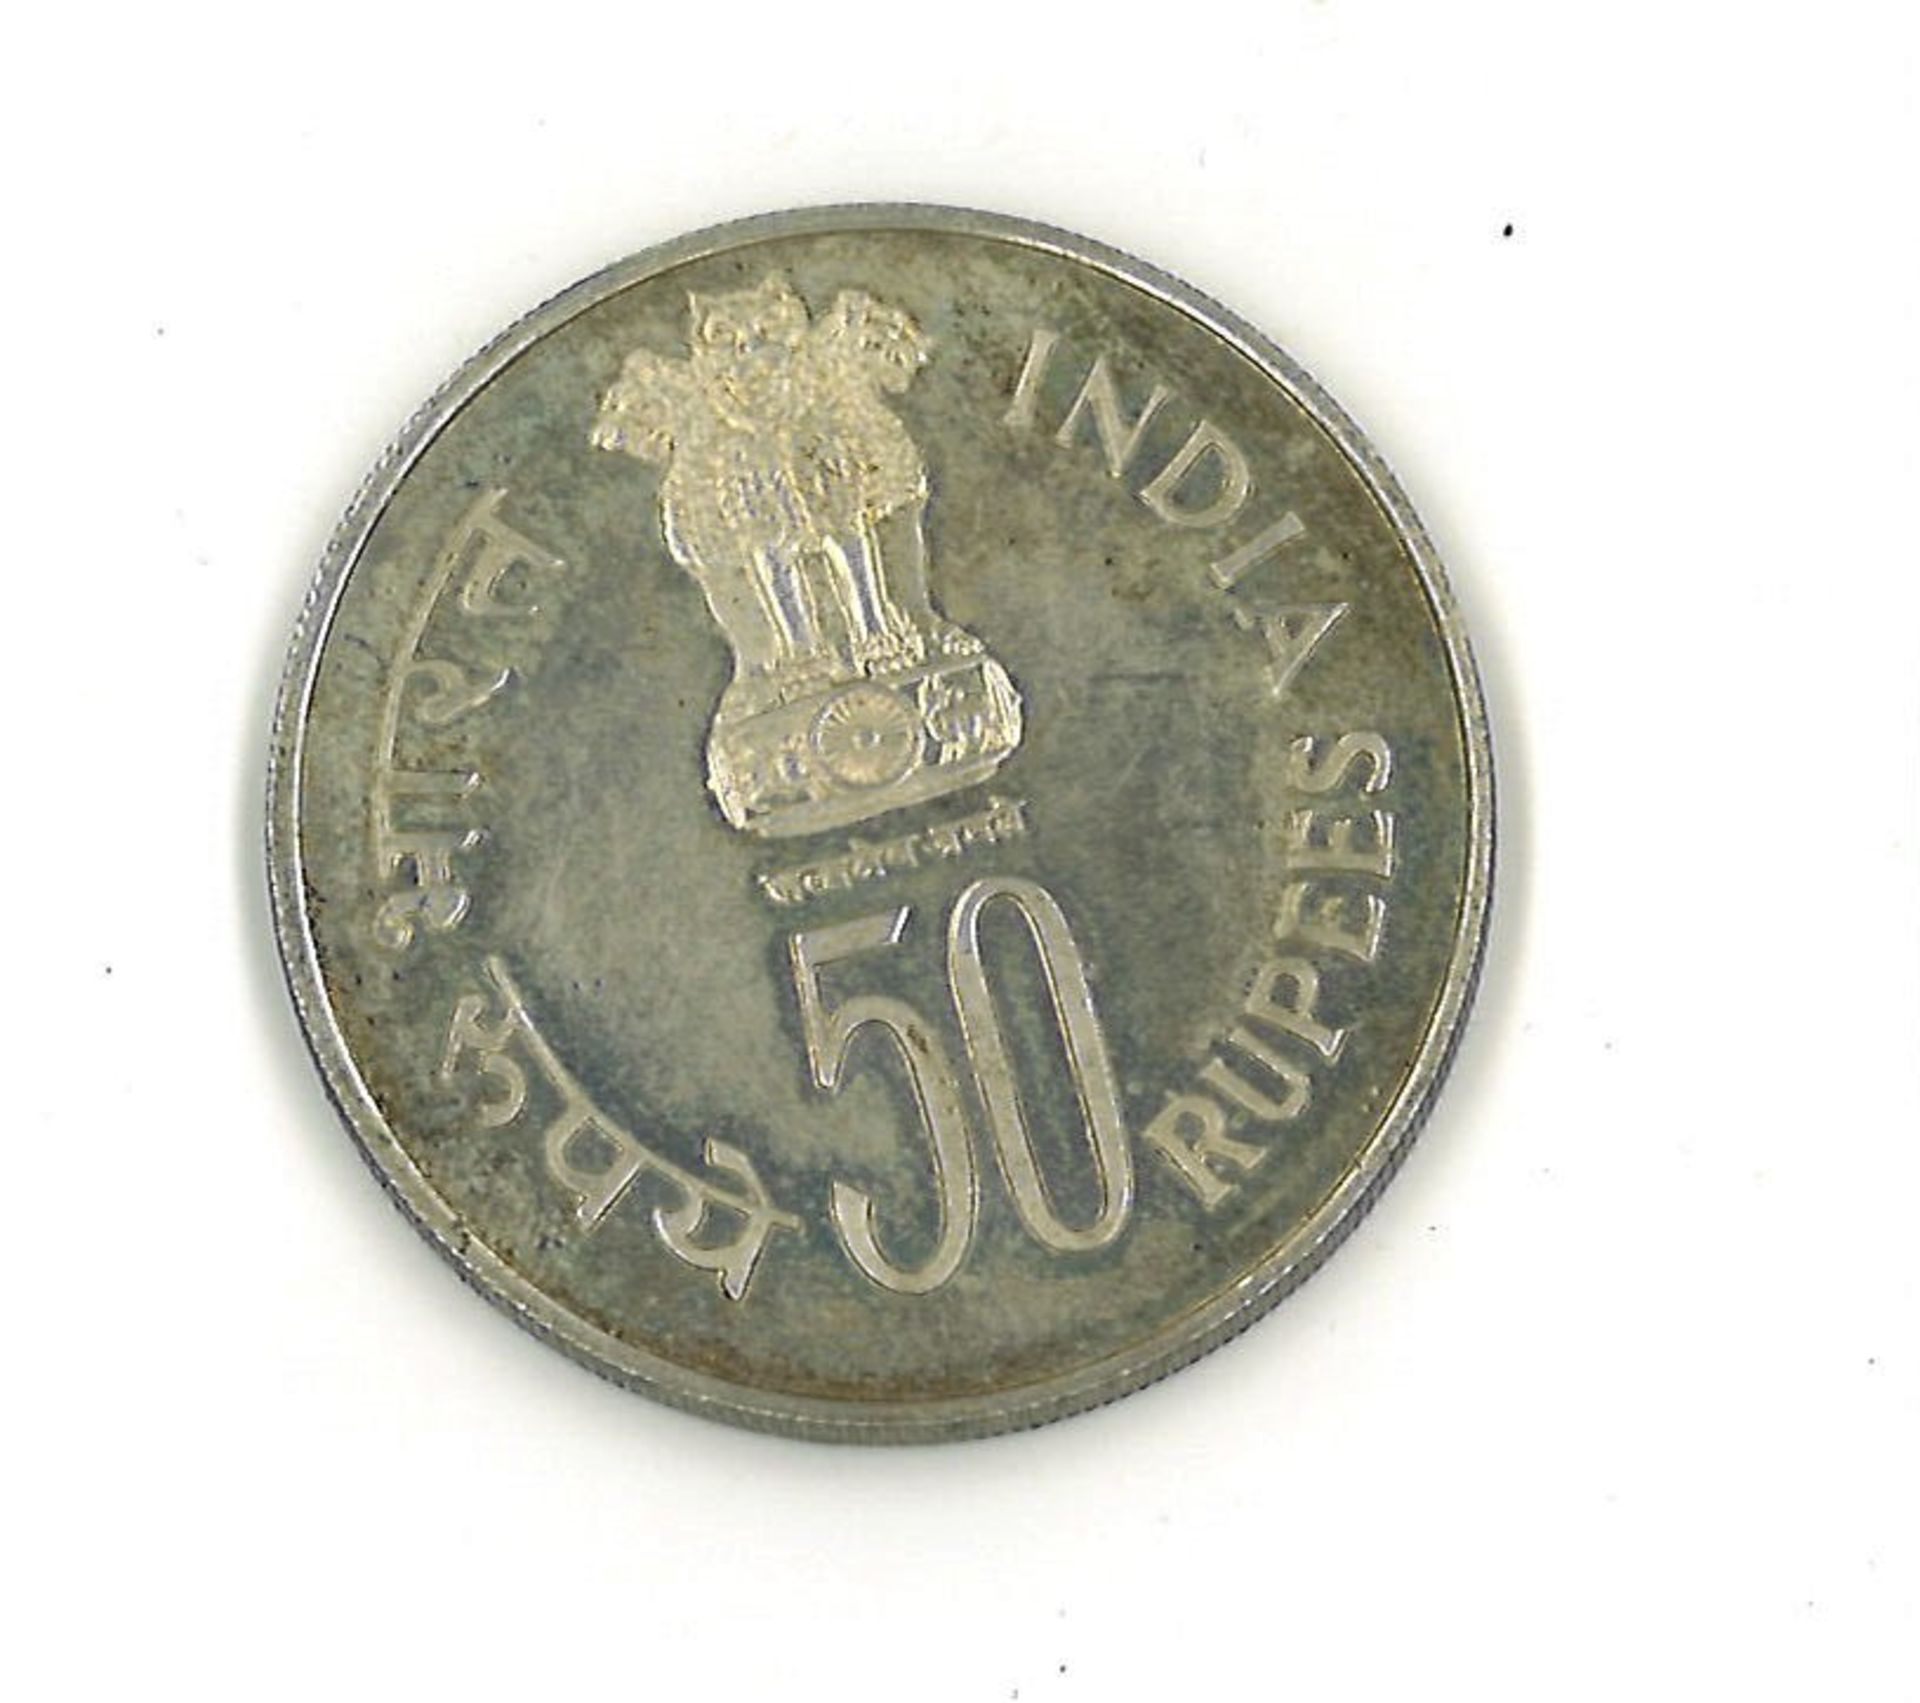 Indien. 50 Rupees Silber 1979 - Image 2 of 2